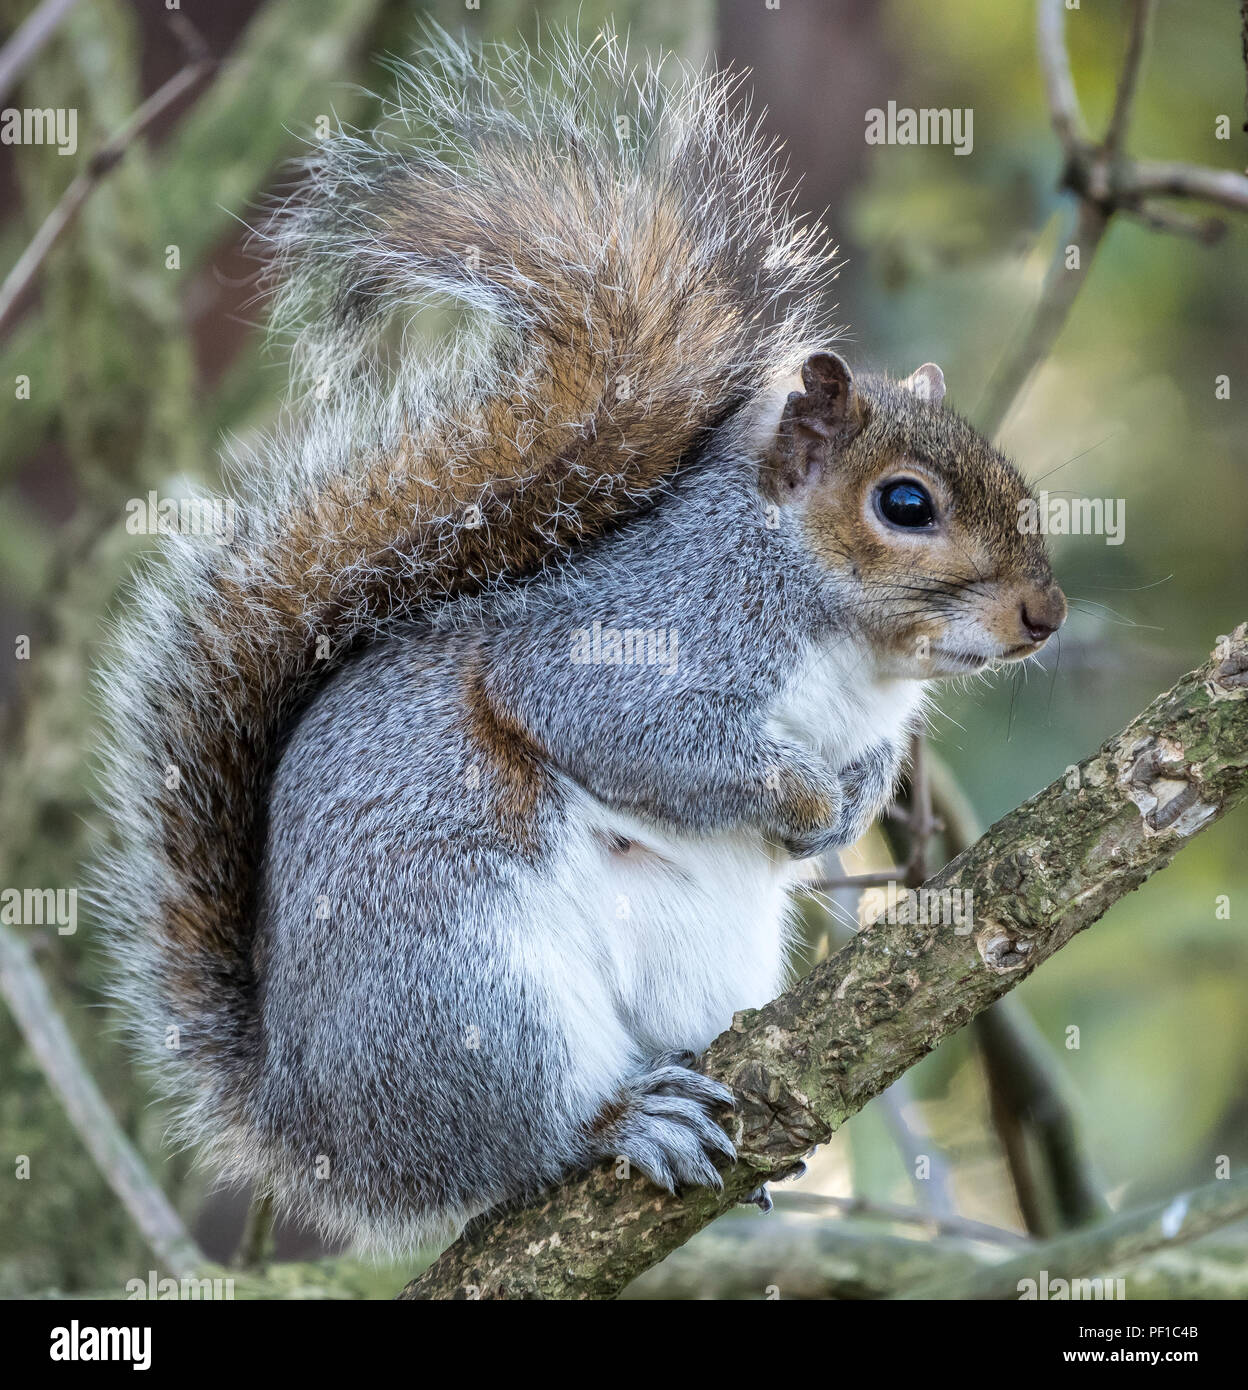 Grey Squirrel on branch Stock Photo